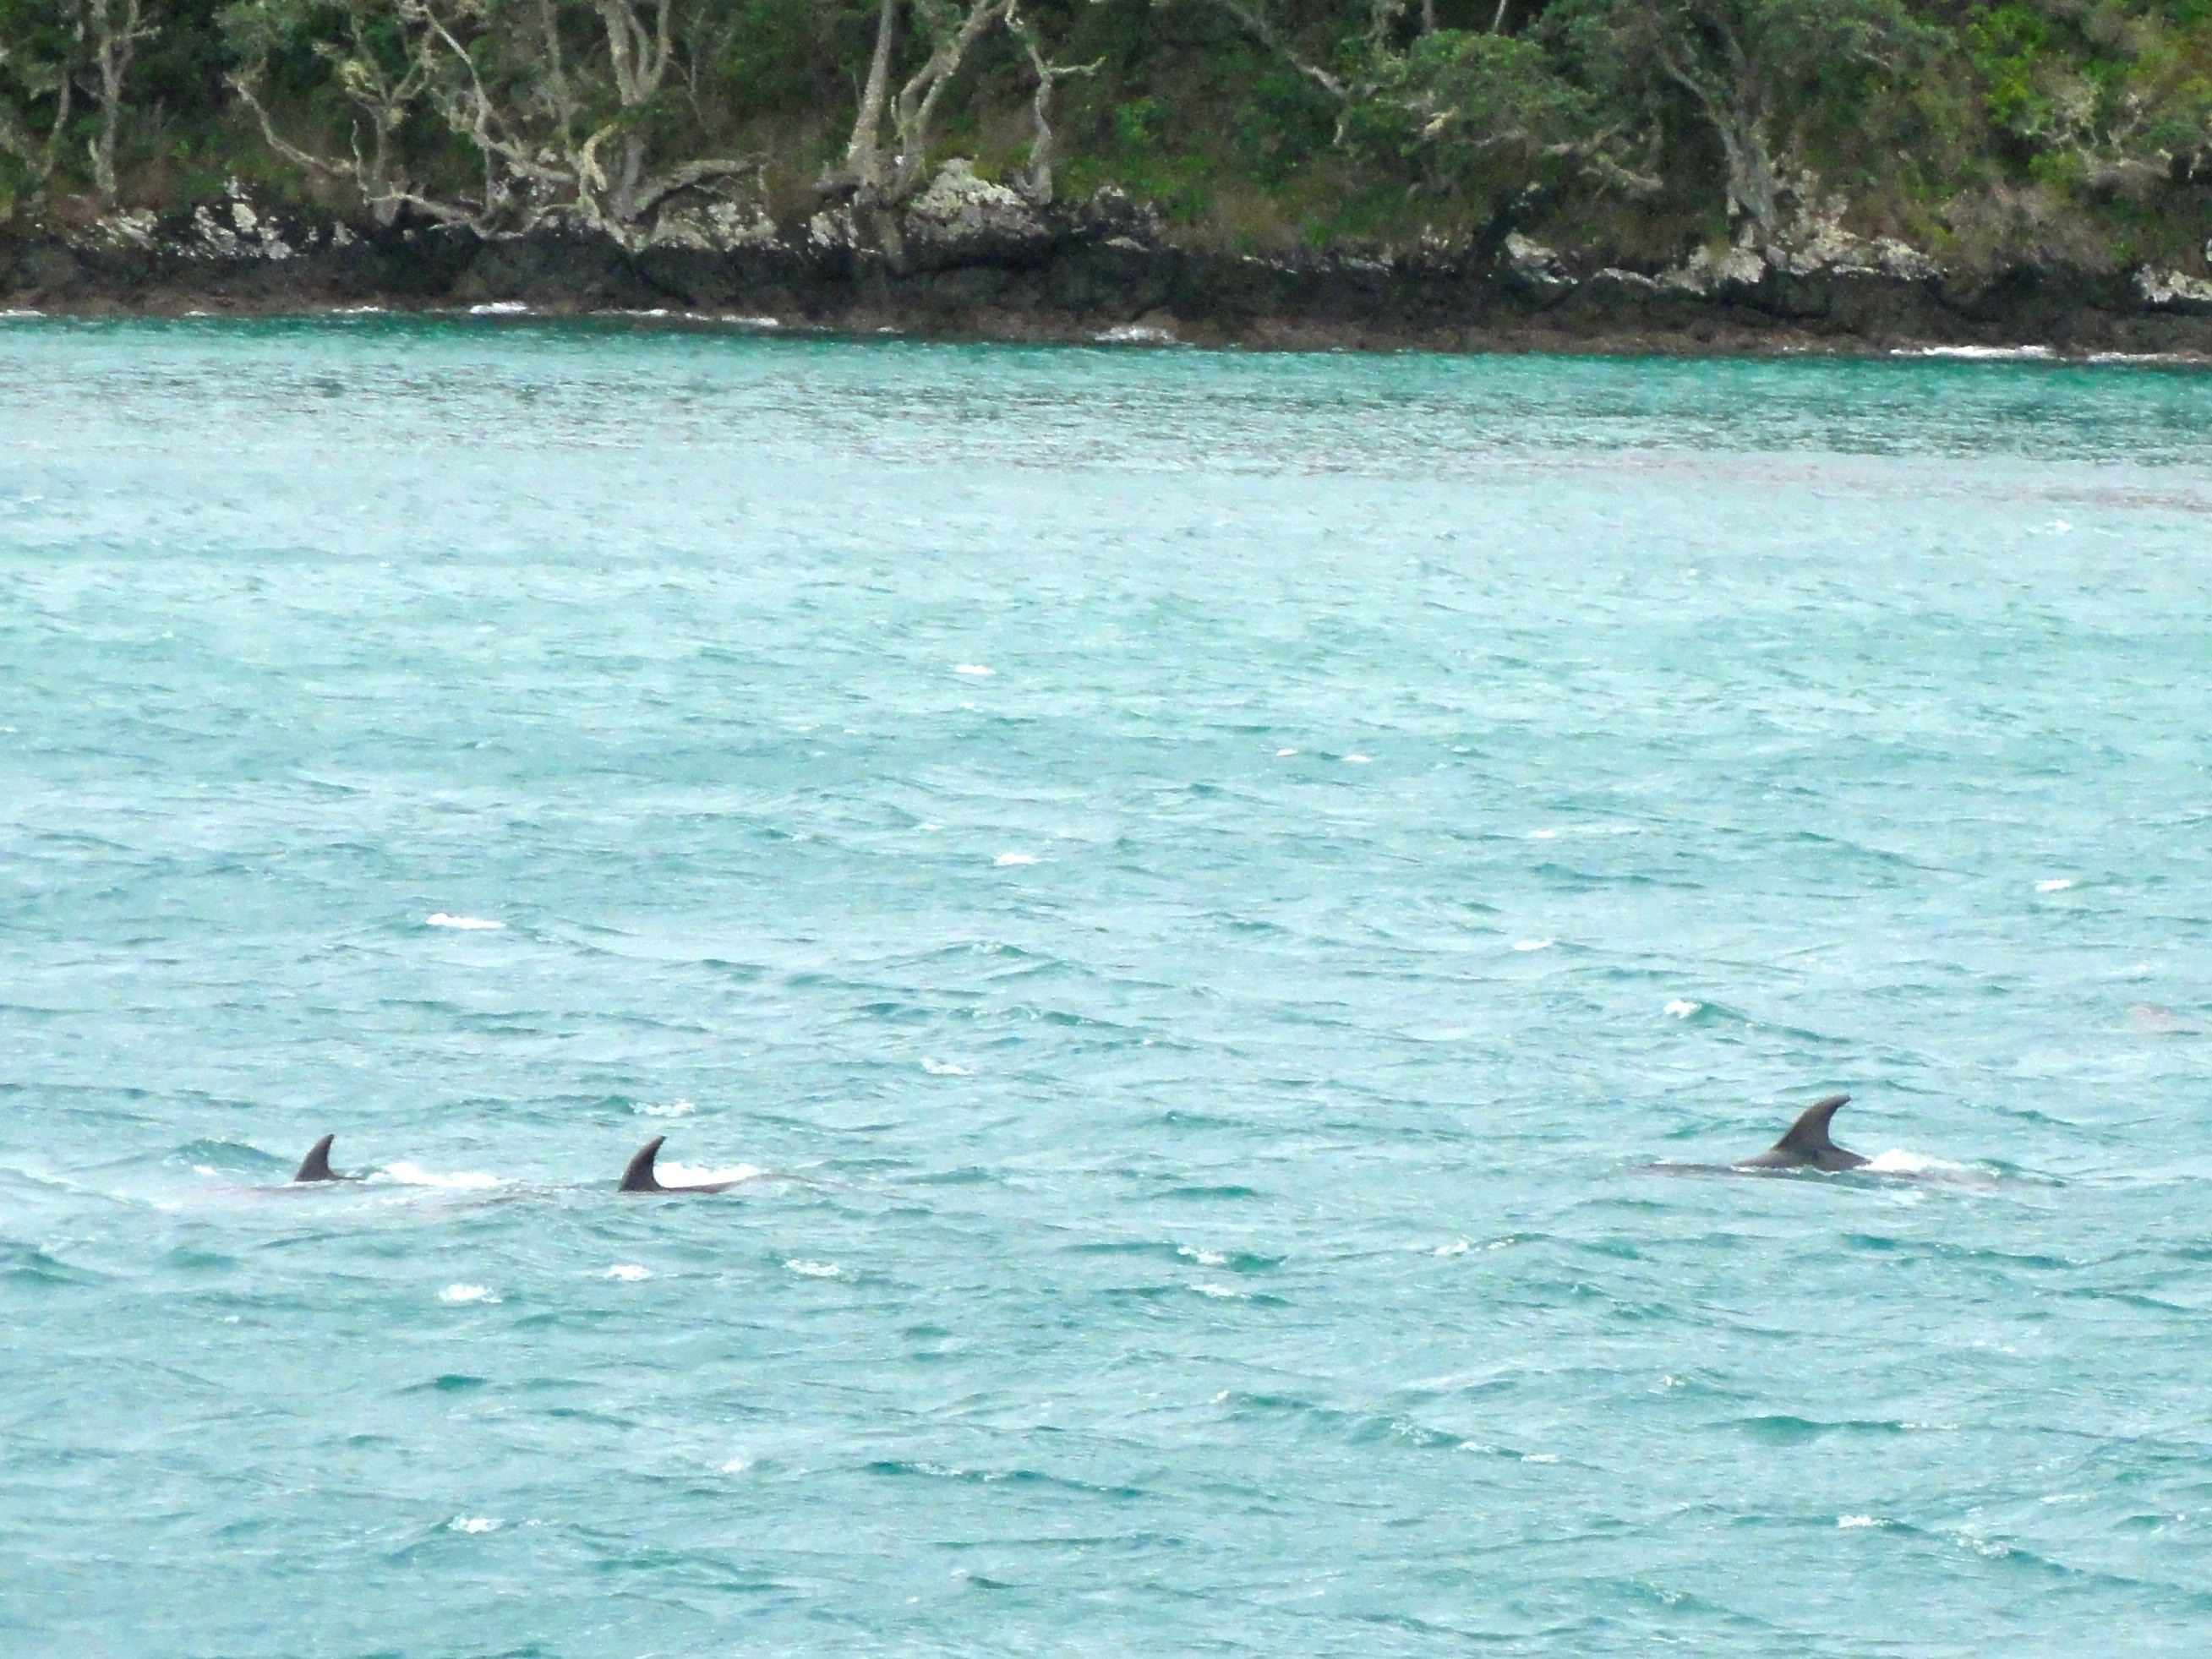 Dolphins in the Bay of Islands